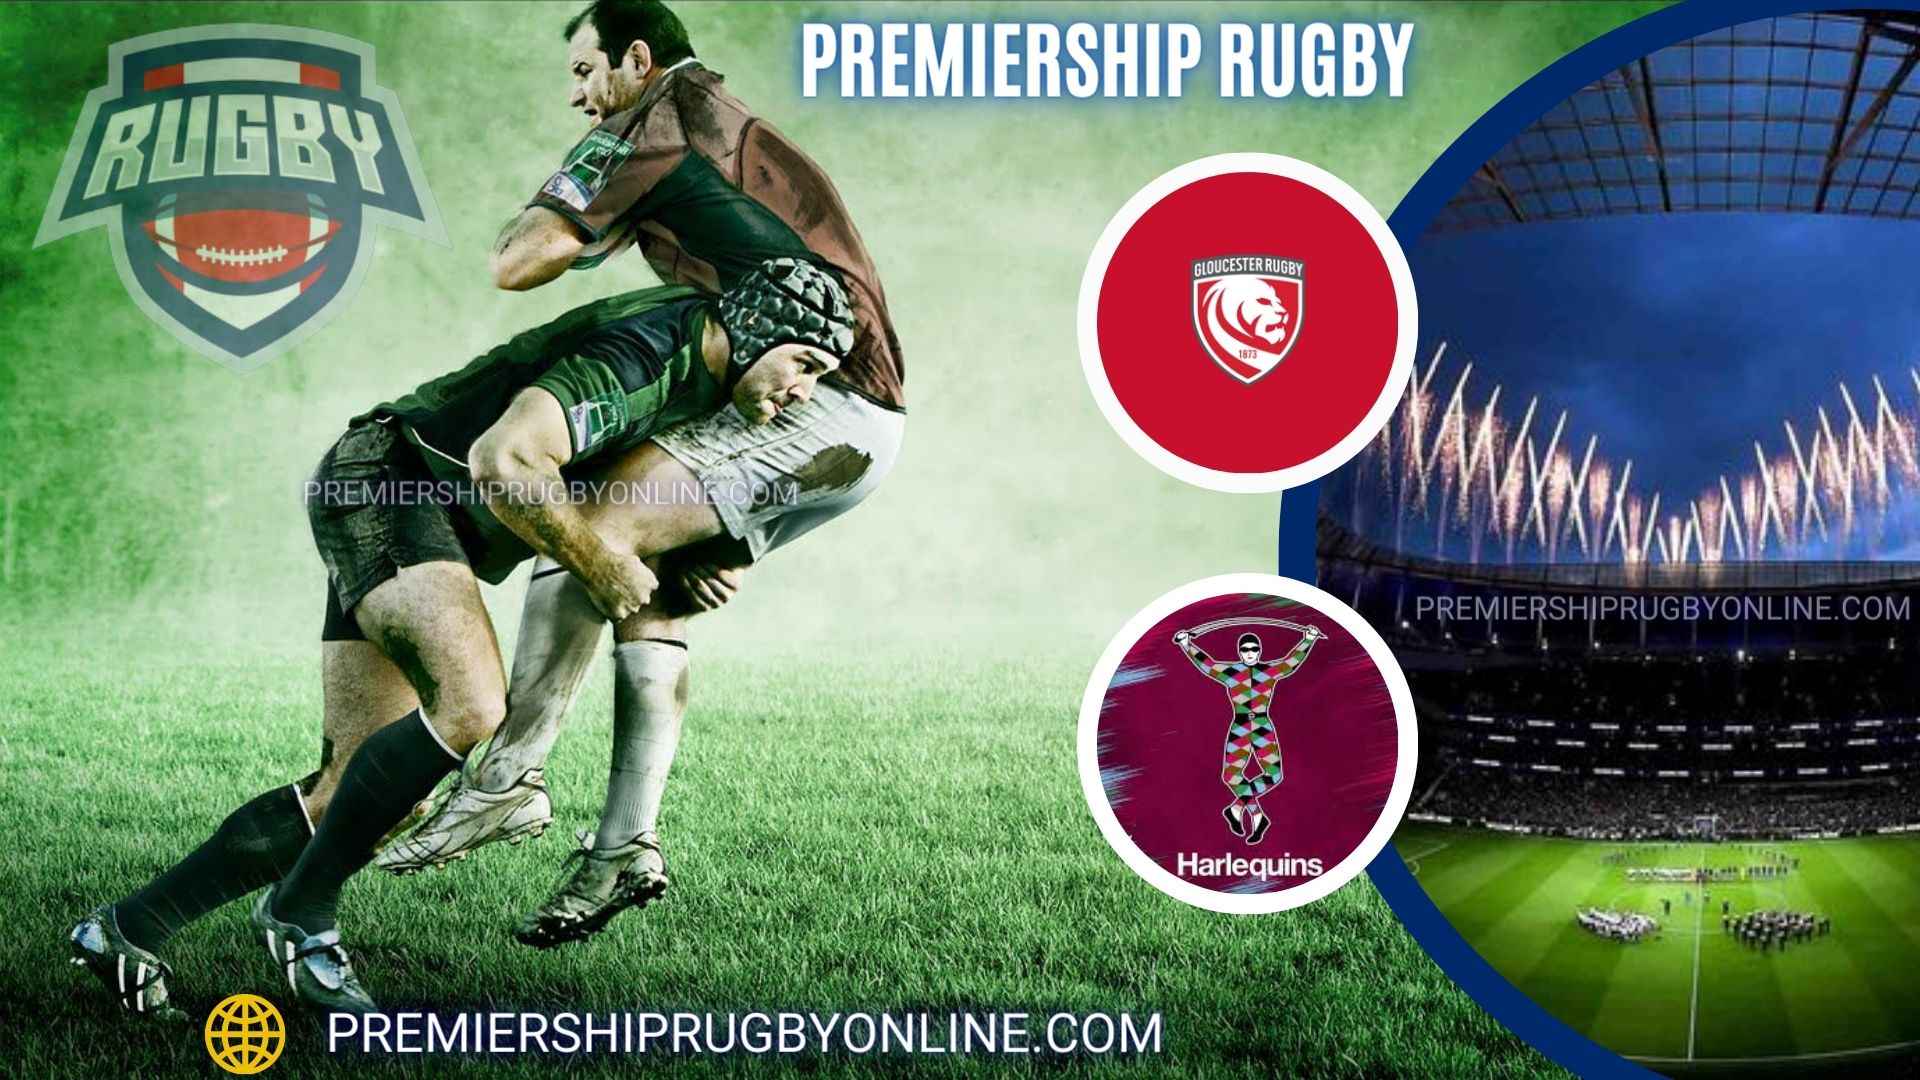 Gloucester Rugby Vs Harlequins Live Stream 2022-23 | Premiership Rugby RD 17